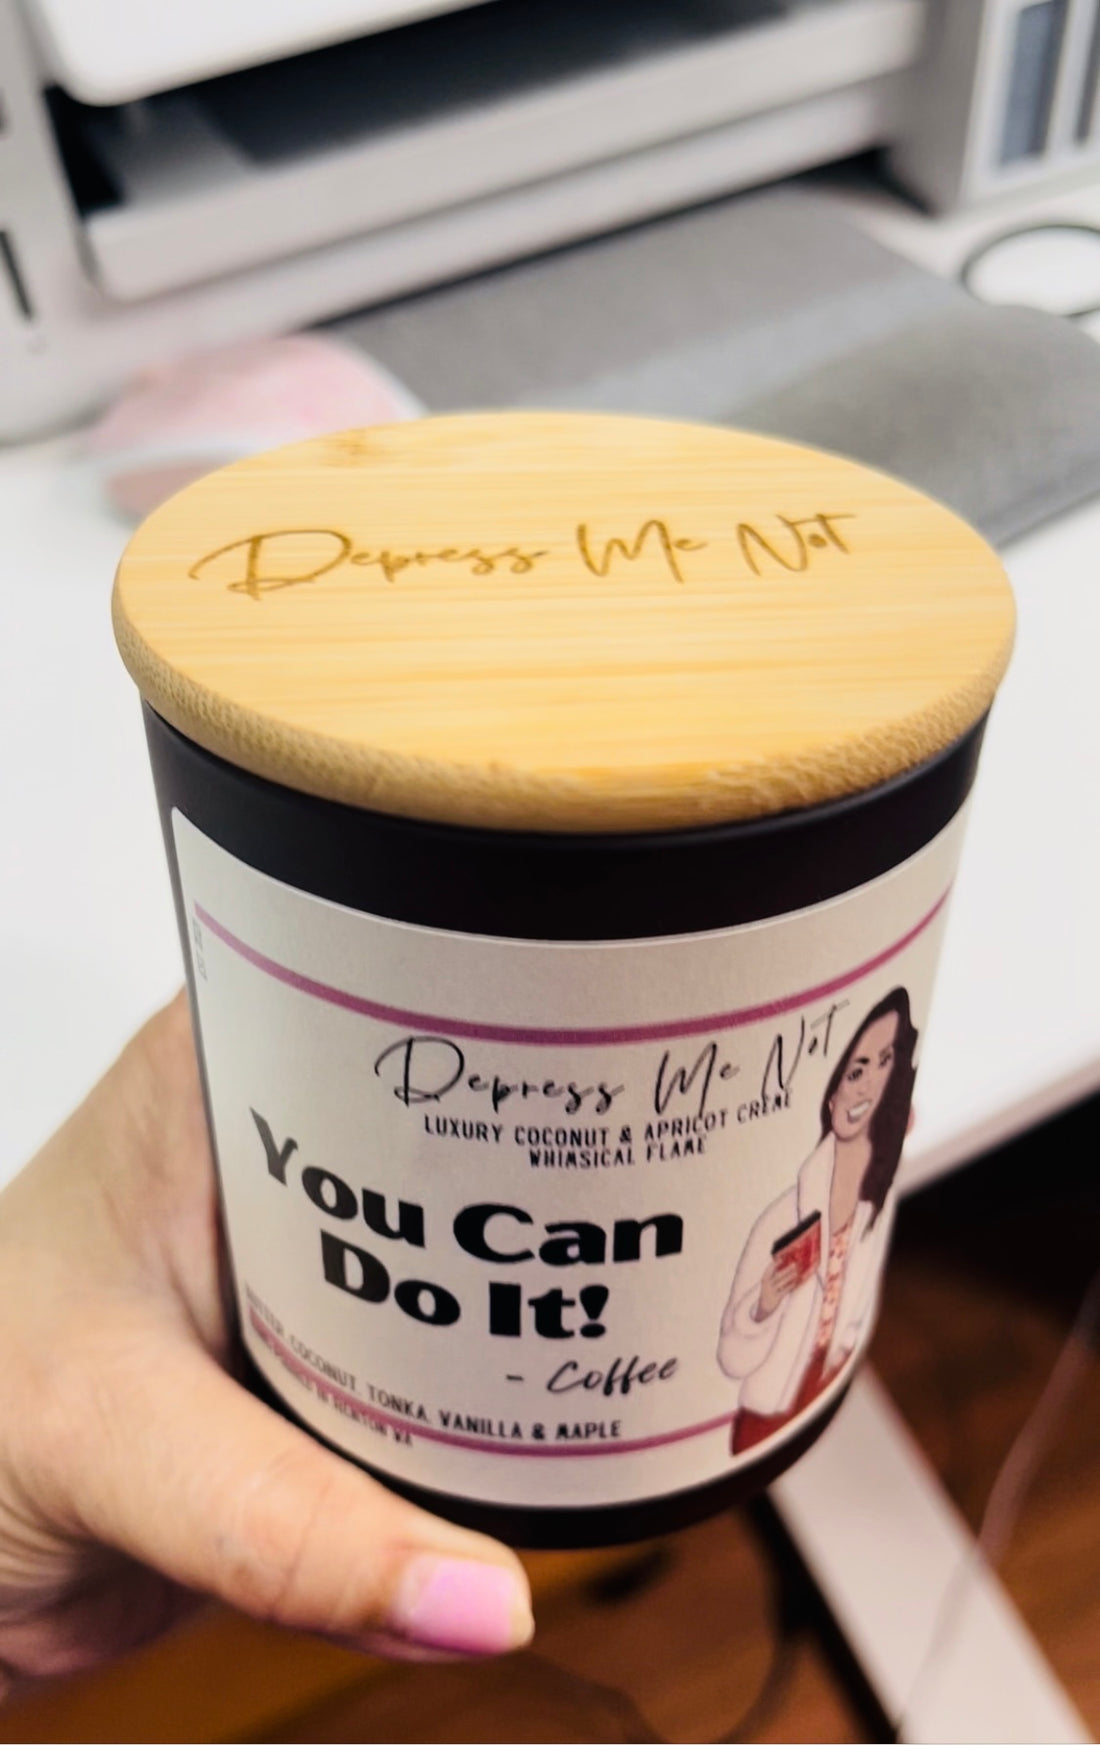 You Can Do It! - Coffee